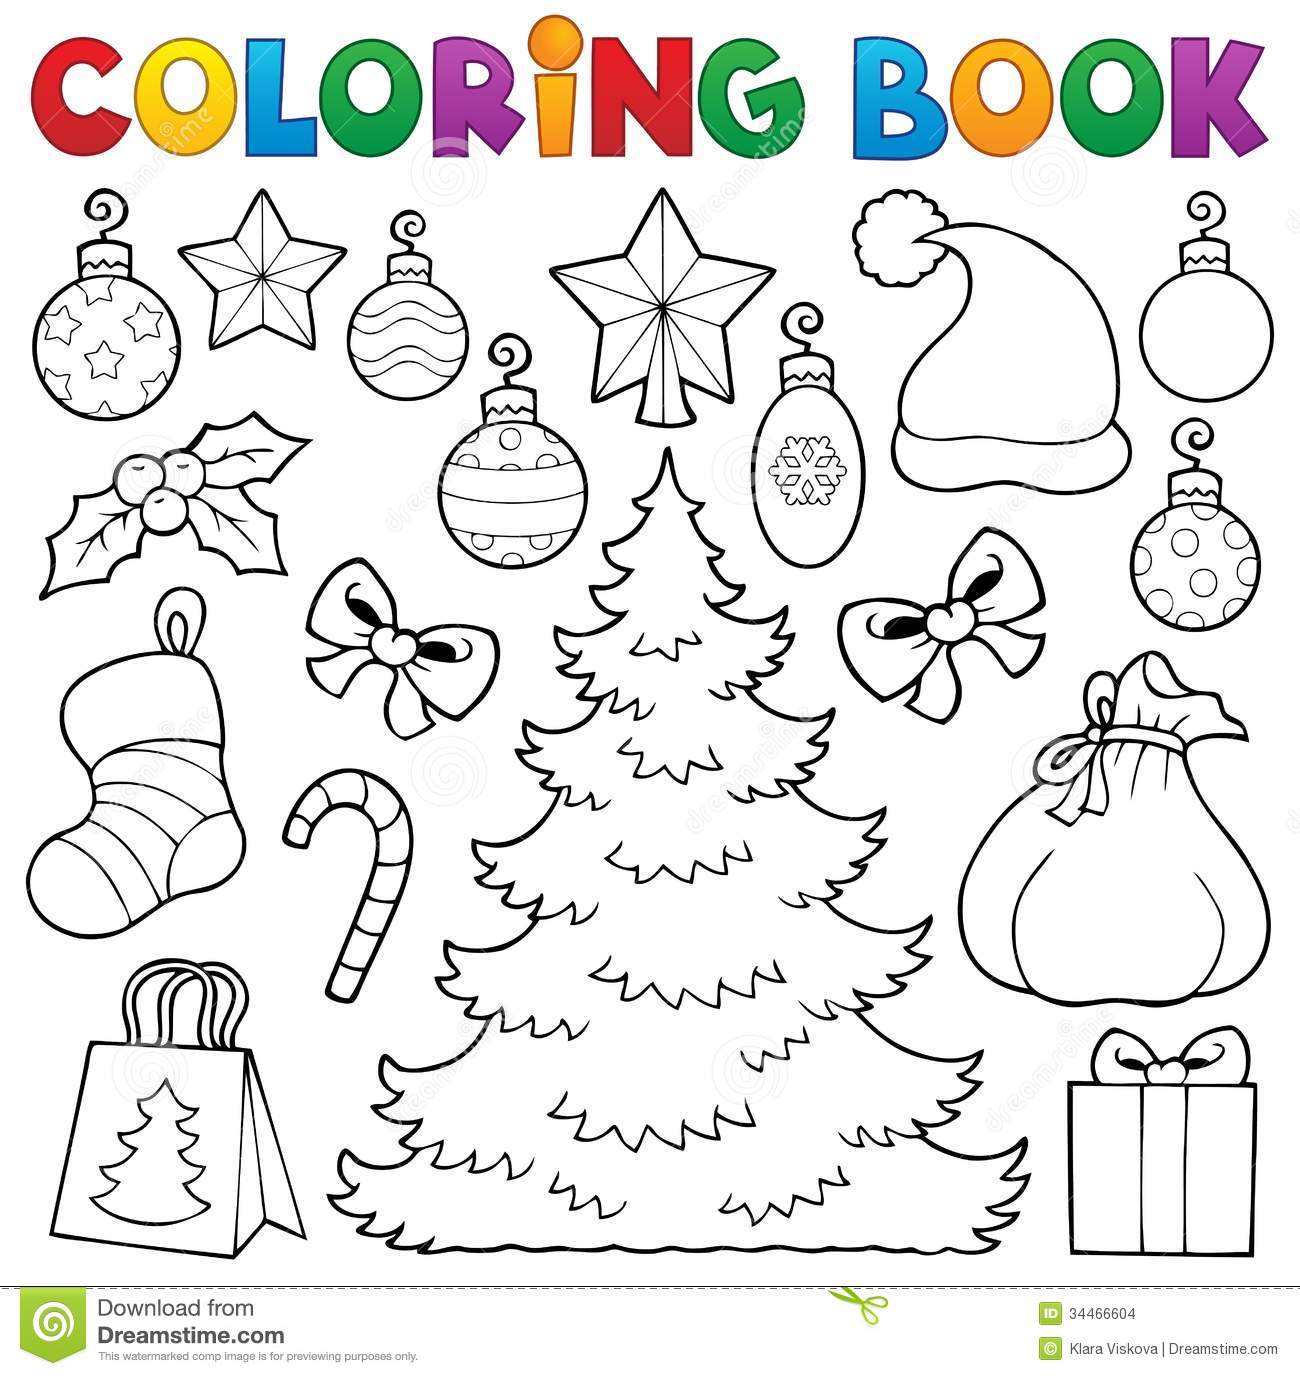 Coloring Book Christmas Decor 1 Stock Images   Image  34466604